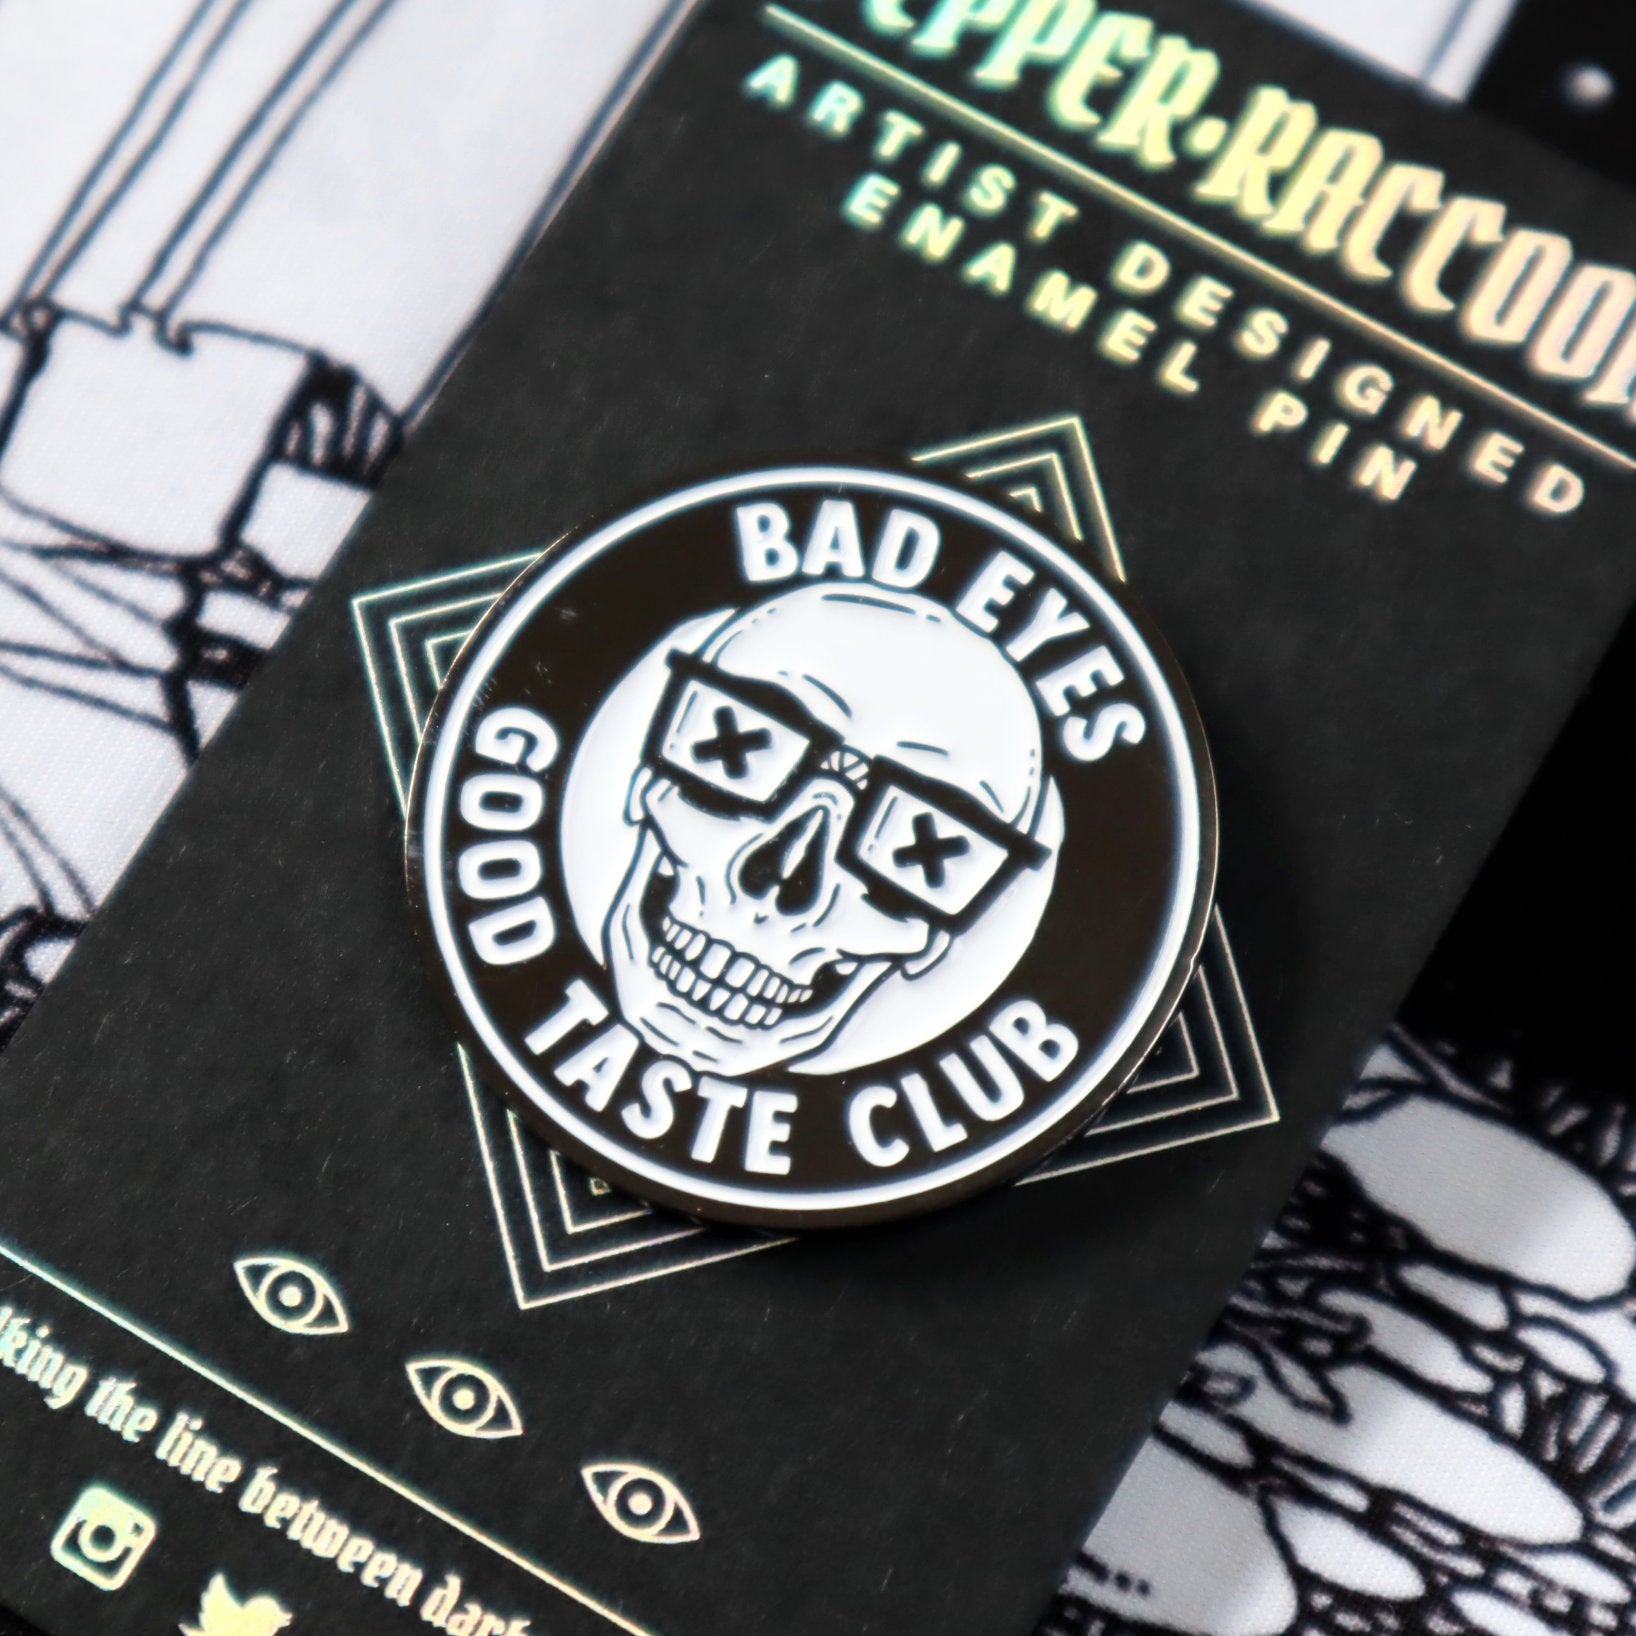 A close-up of an enamel pin featuring a grinning skull wearing nerd glasses and the words Bad Eyes, Good Taste Club.